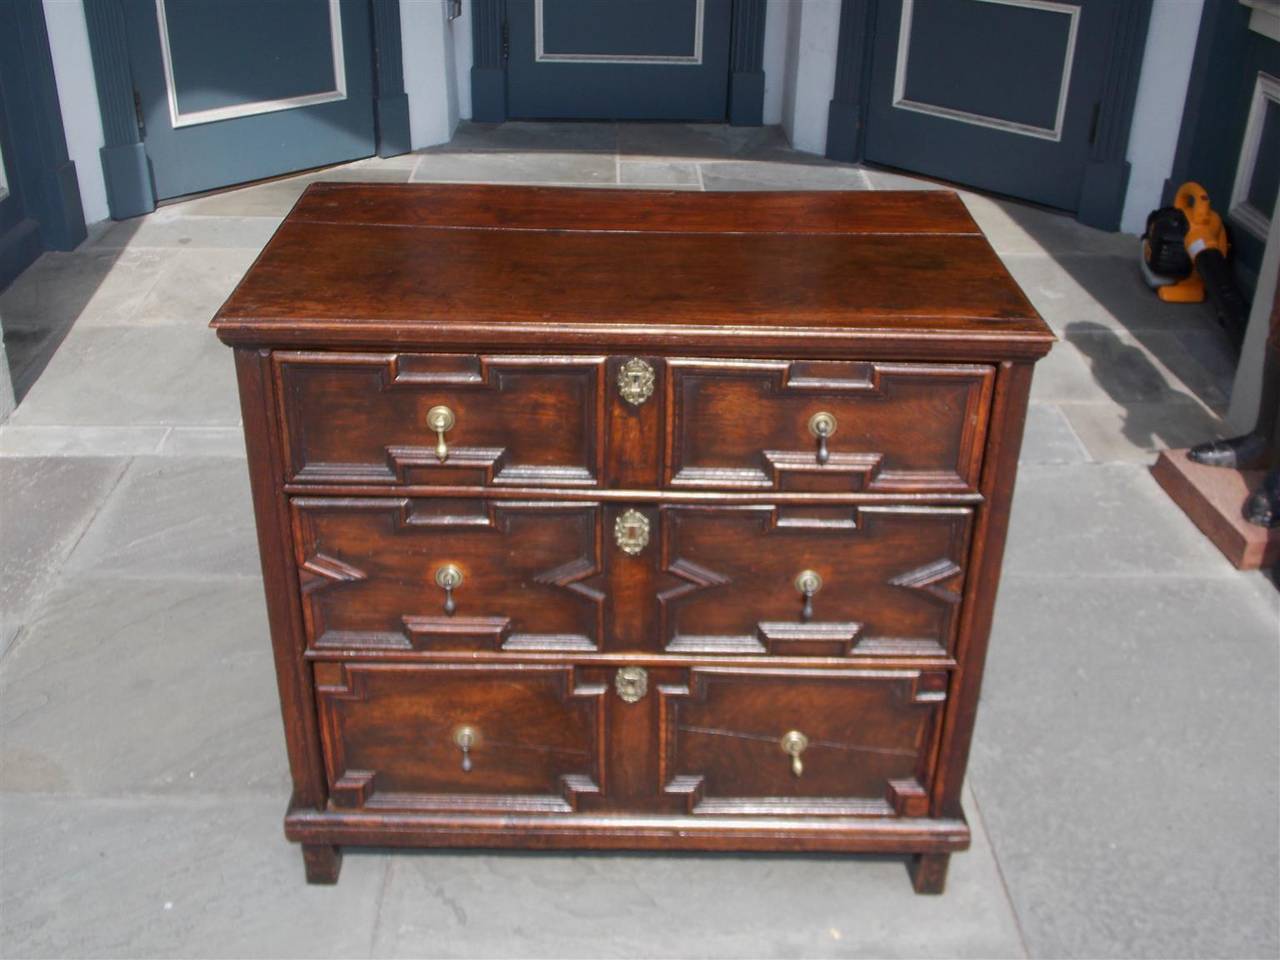 English oak Jacobean graduated three-drawer chest with original brasses, carved geometrical motif and terminating on a molded edge with original block feet. Secondary wood consist of deel (white pine), Mid-18th Century.